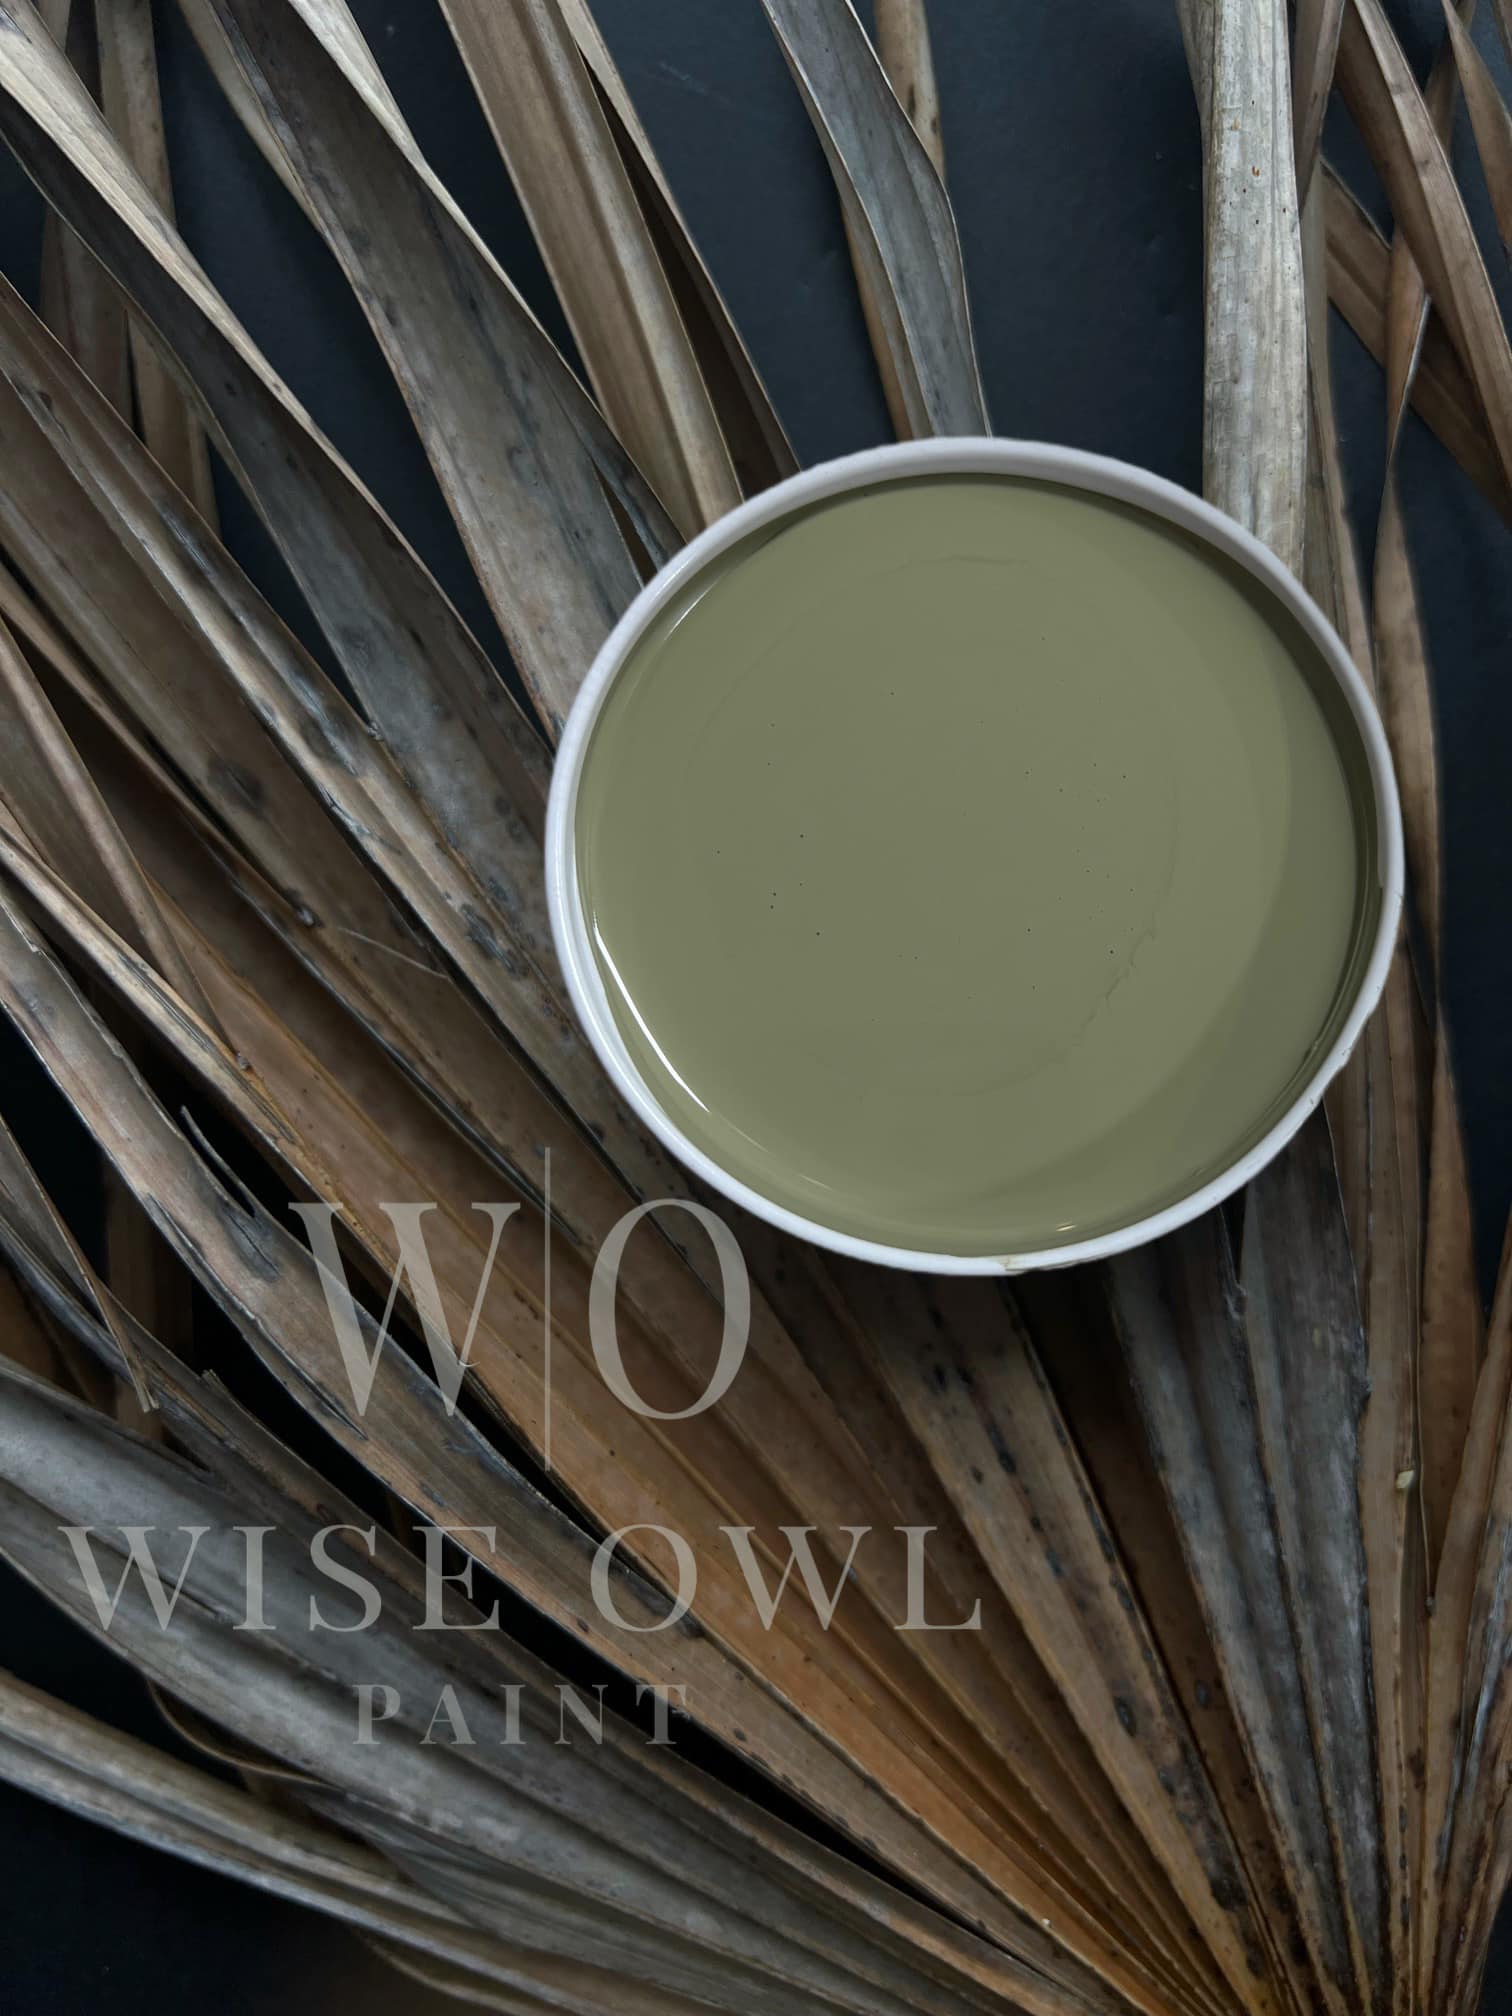 overland green paint swatch from wise owl paint one hour enamel wilderness collection. dried palm leaf background